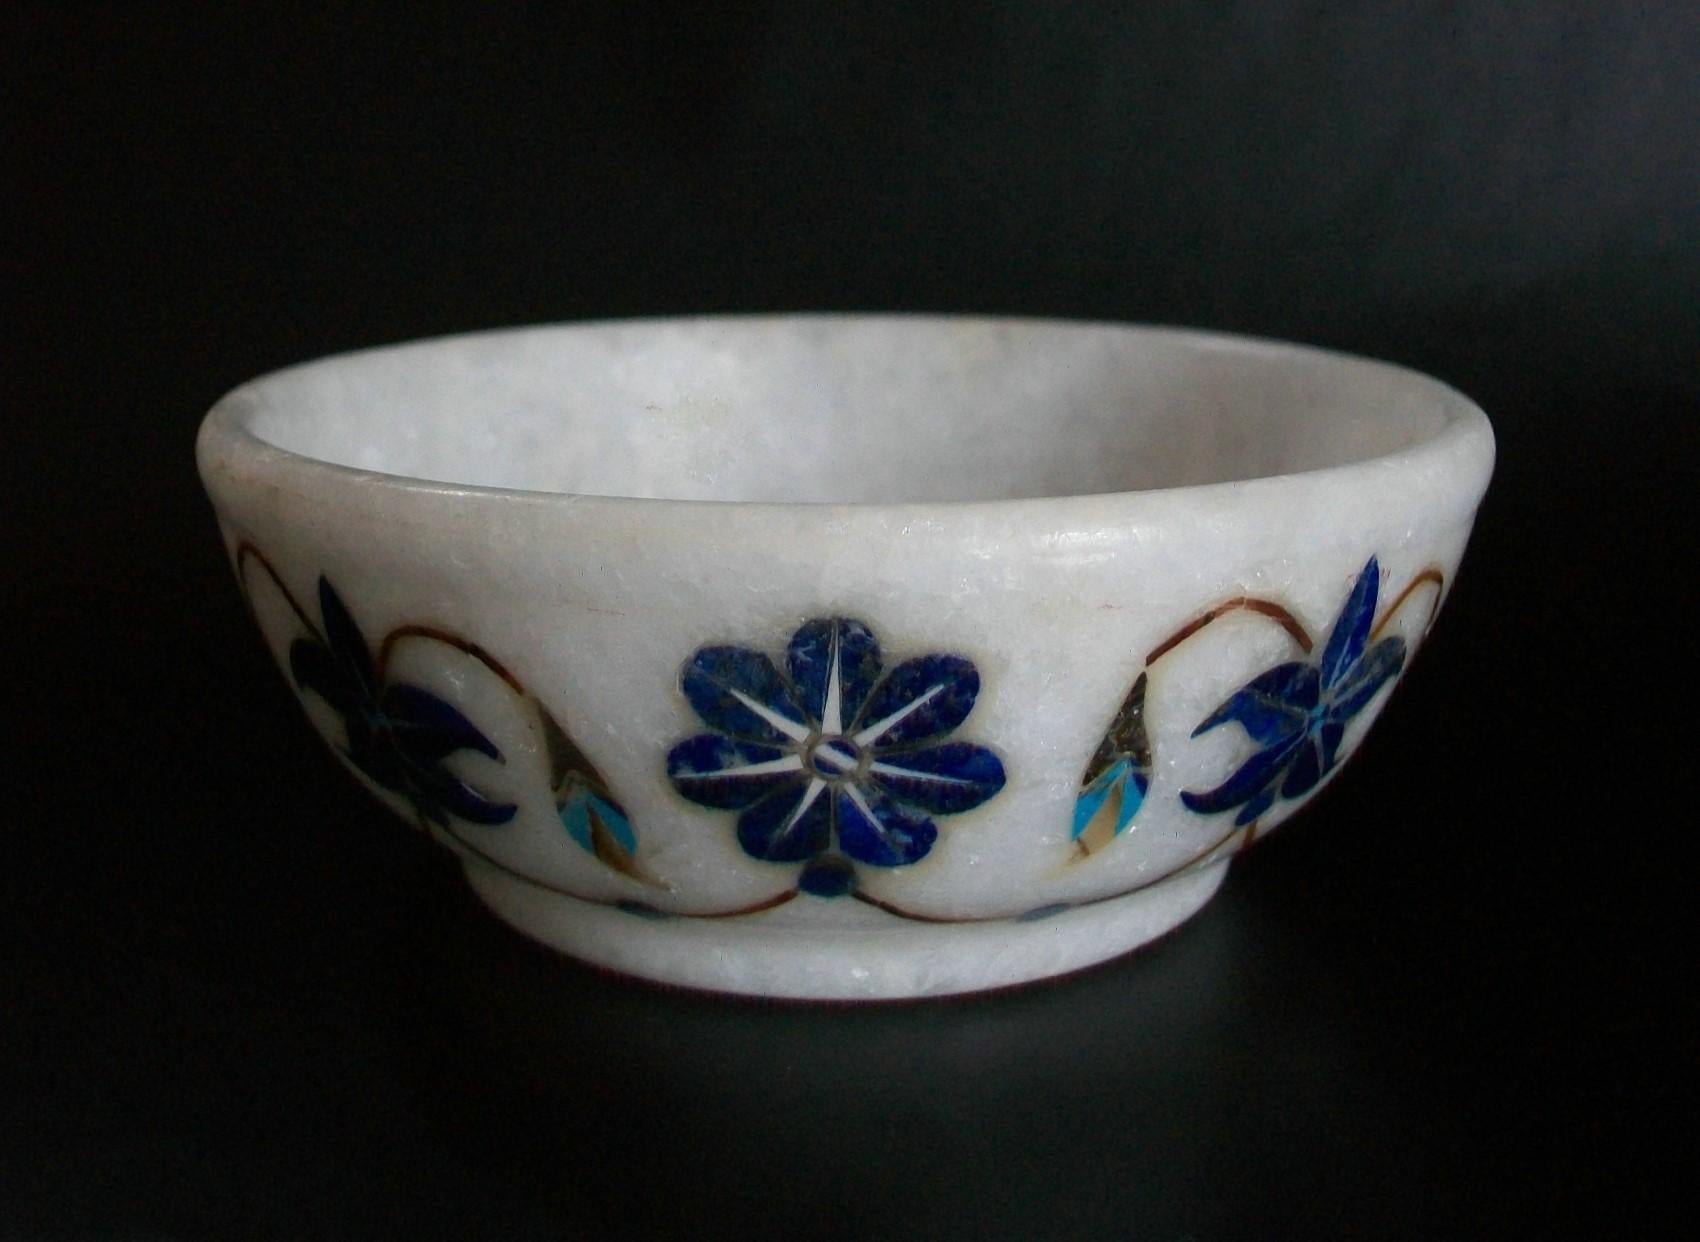 Mughal style pietra dura marble bowl - hand made - featuring a floral design with lapis lazuli, malachite, mother-of-pearl and turquoise inlay - unsigned - India - mid 20th century.

Excellent pre-owned condition - no loss - no damage - no